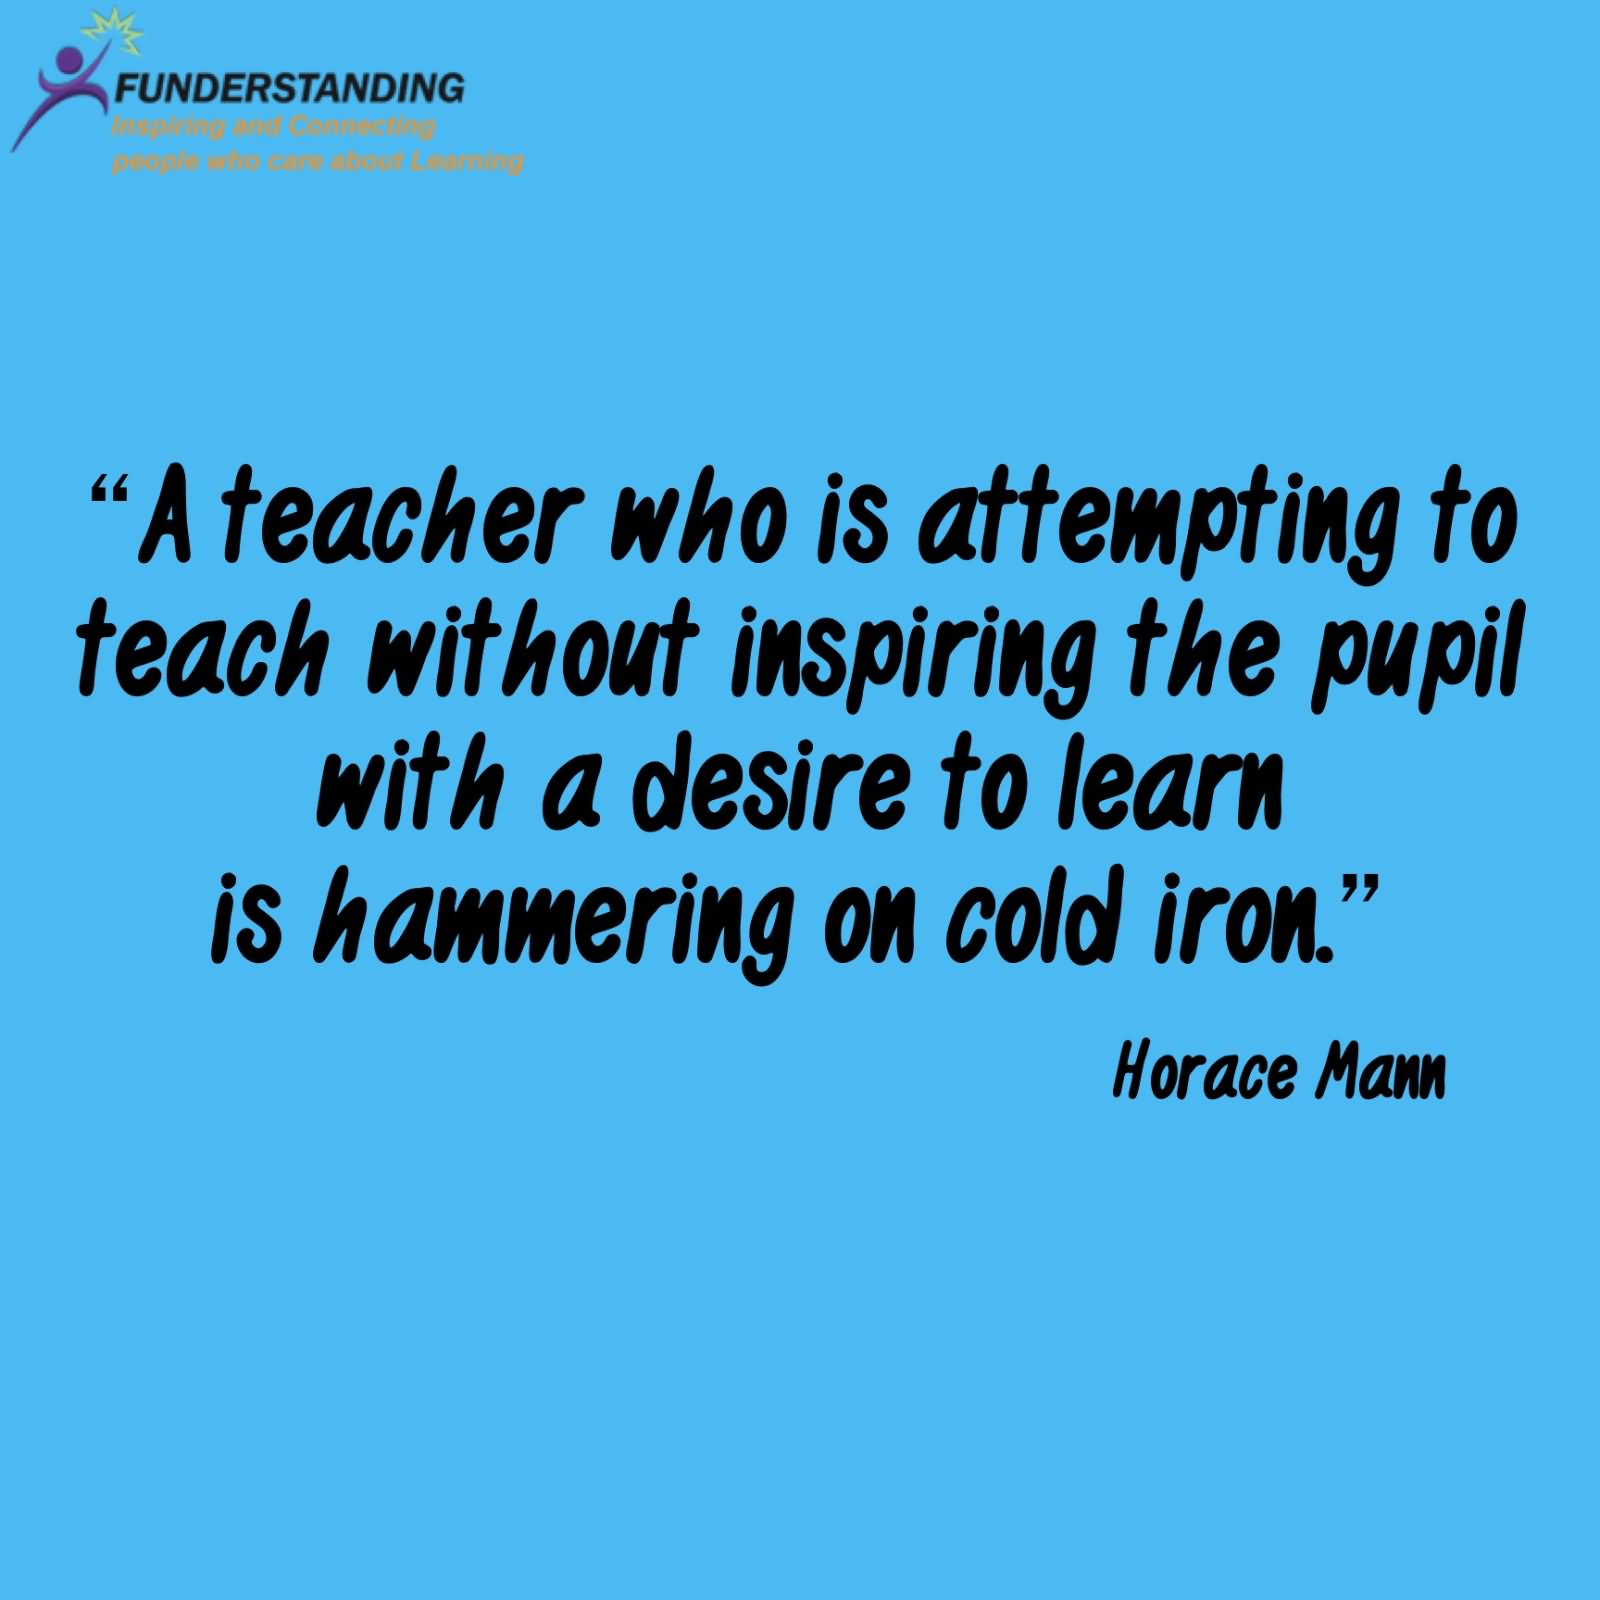 A teacher who is attempting to teach without inspiring the pupil with a desire to learn is hammering on cold iron.